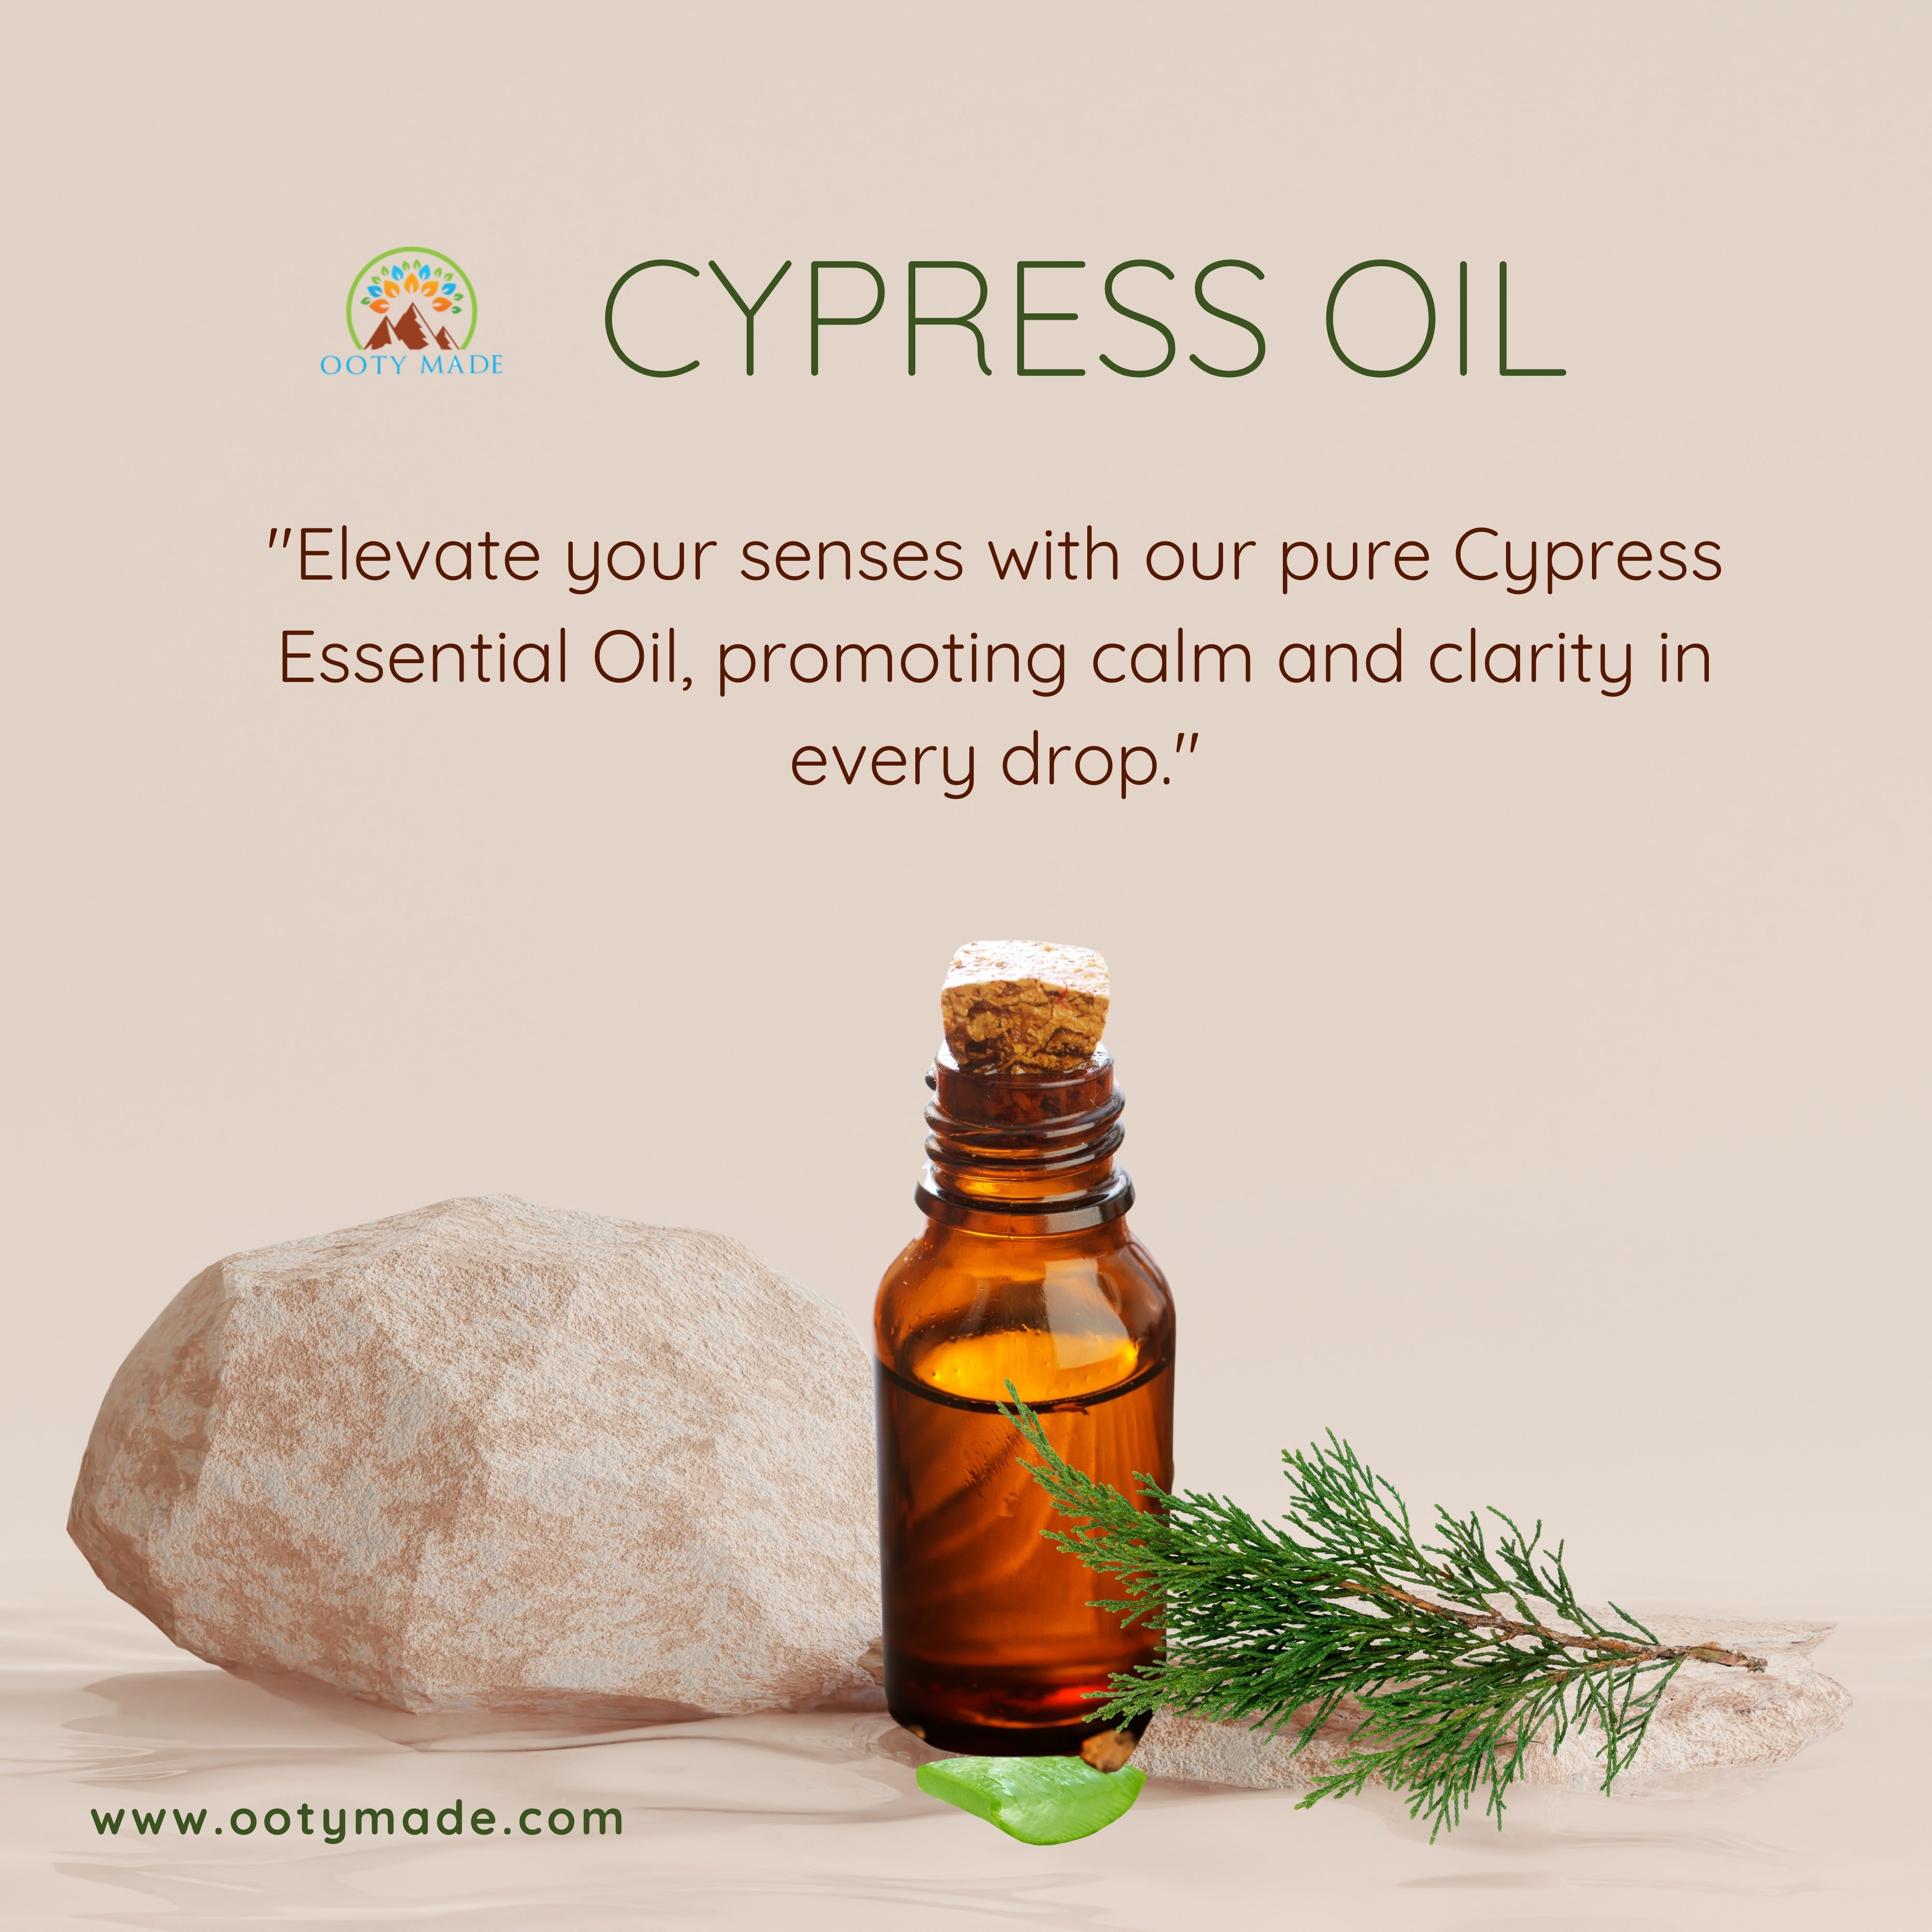 Premium Cypress Essential Oil - Pure Aromatherapy Elixir for Varicose Veins and Beyond